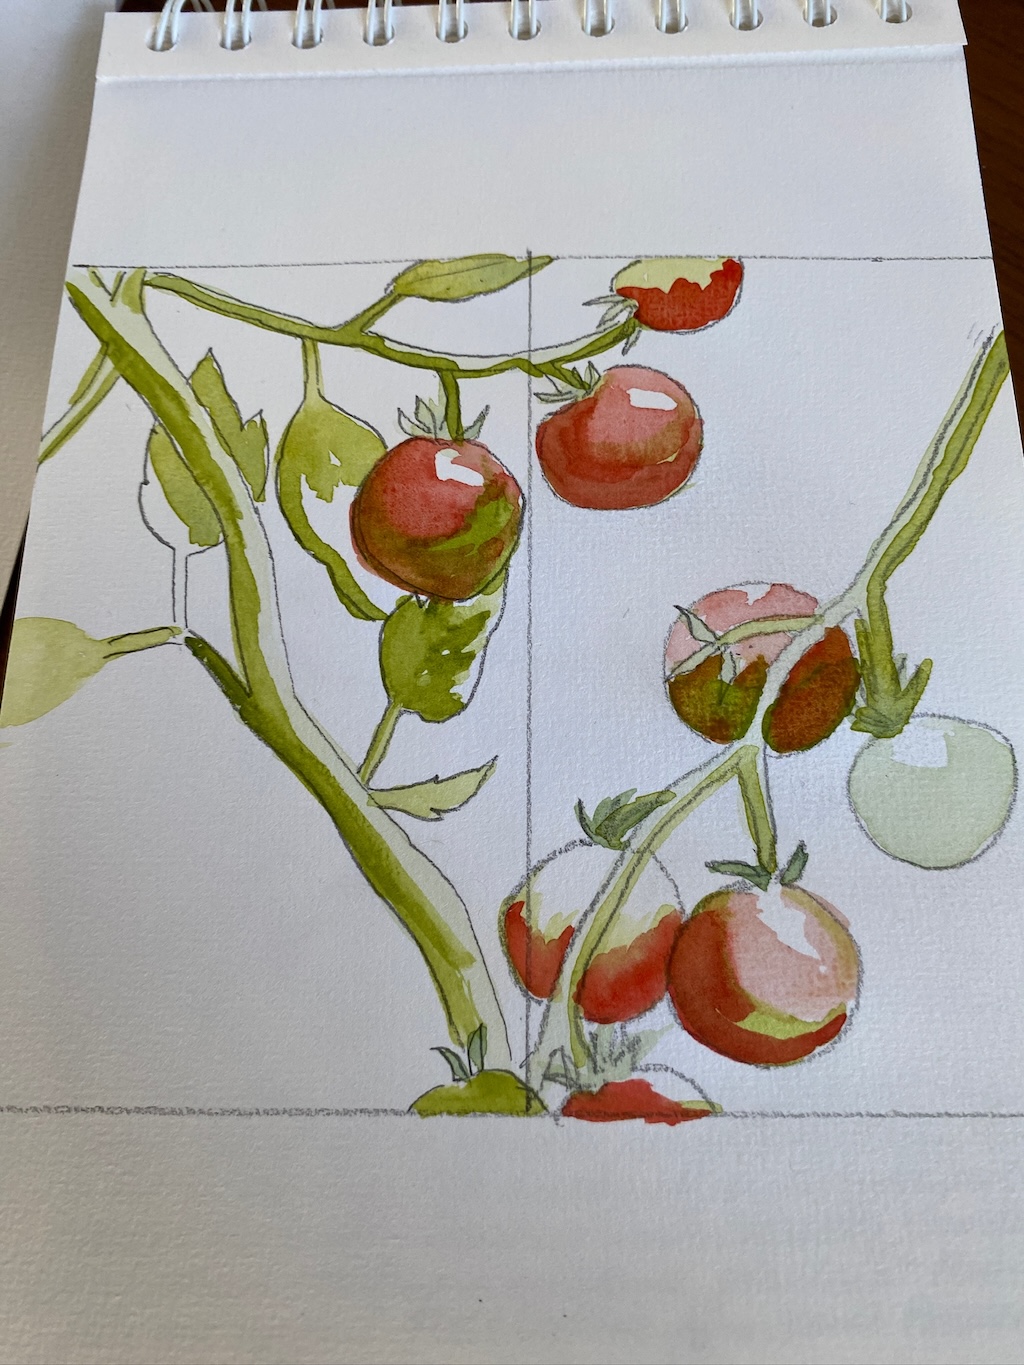 Watercolour sketch of tomatoes, in a spiral bound sketchbook.